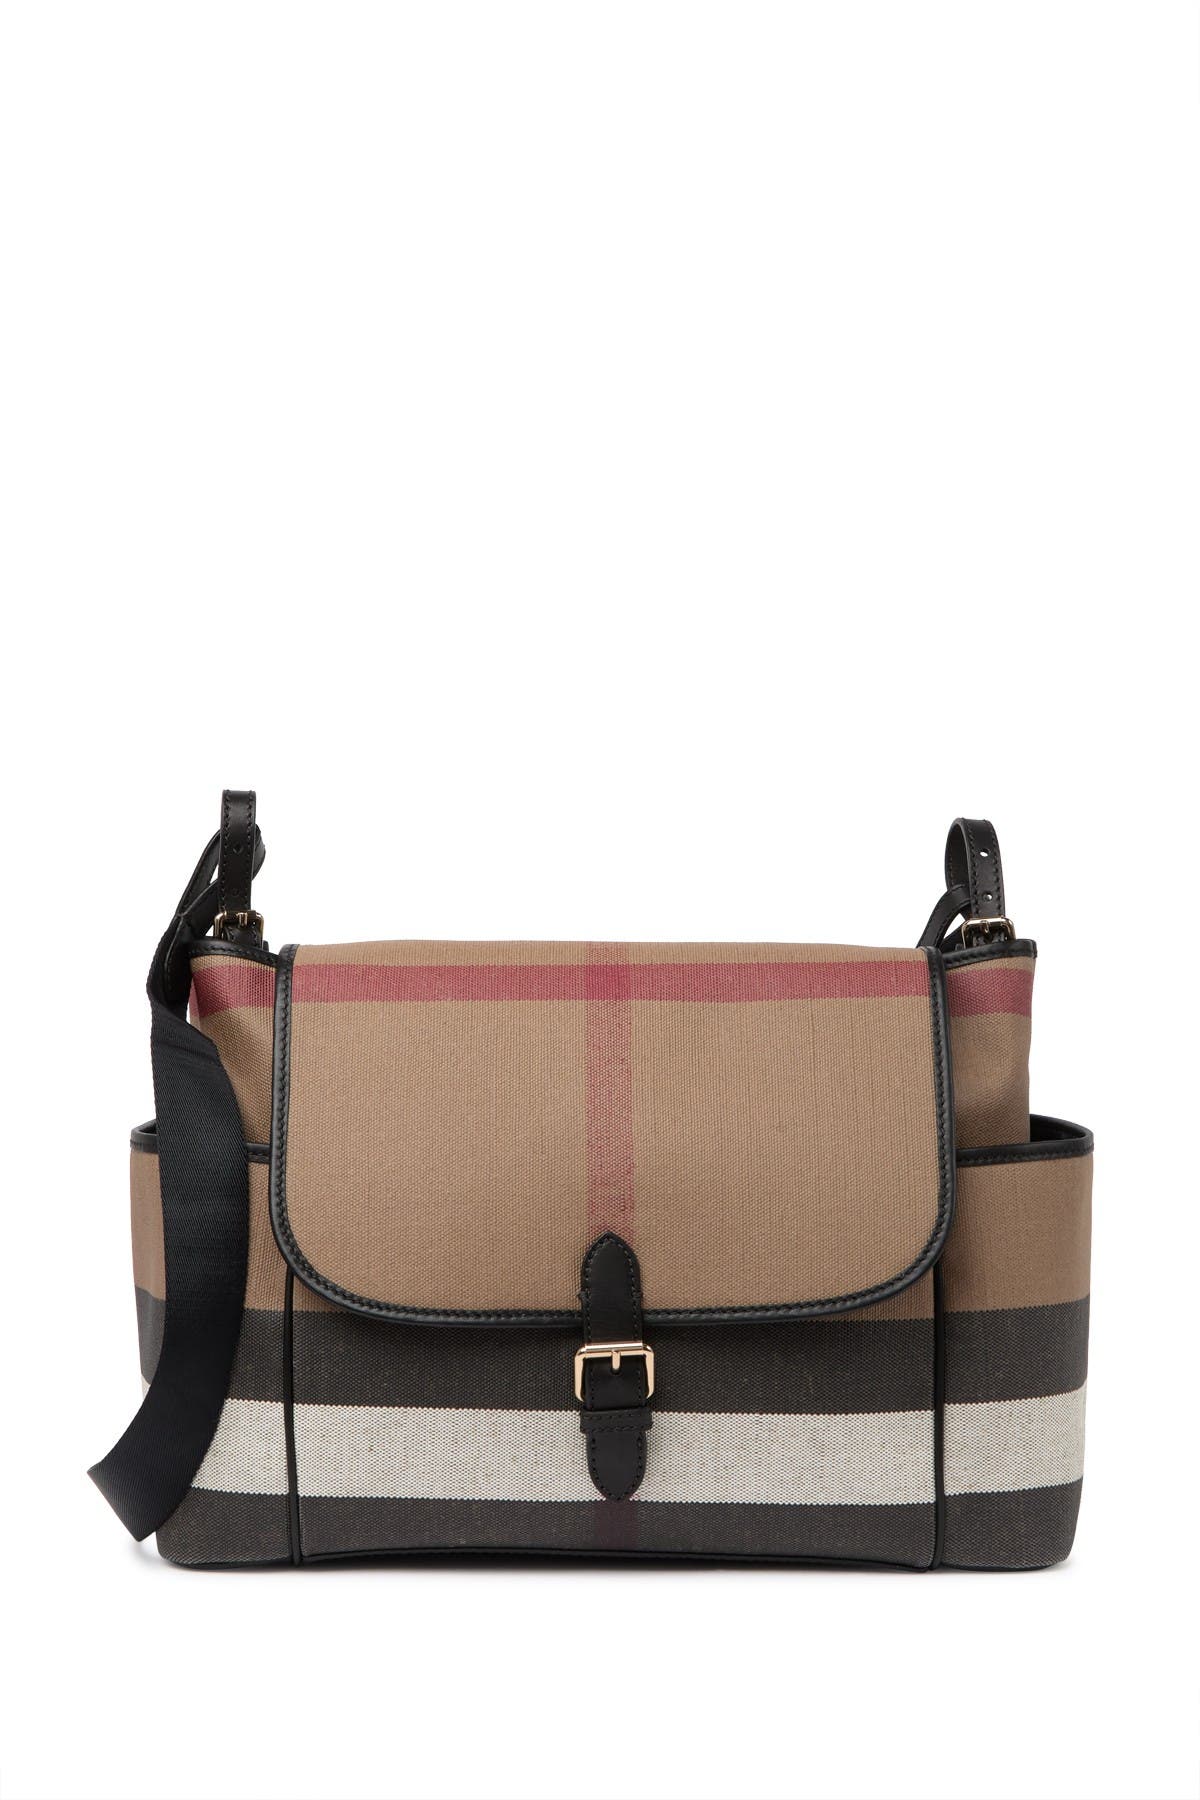 Burberry Kingswood Vintage Check & Leather Diaper Bag in Black